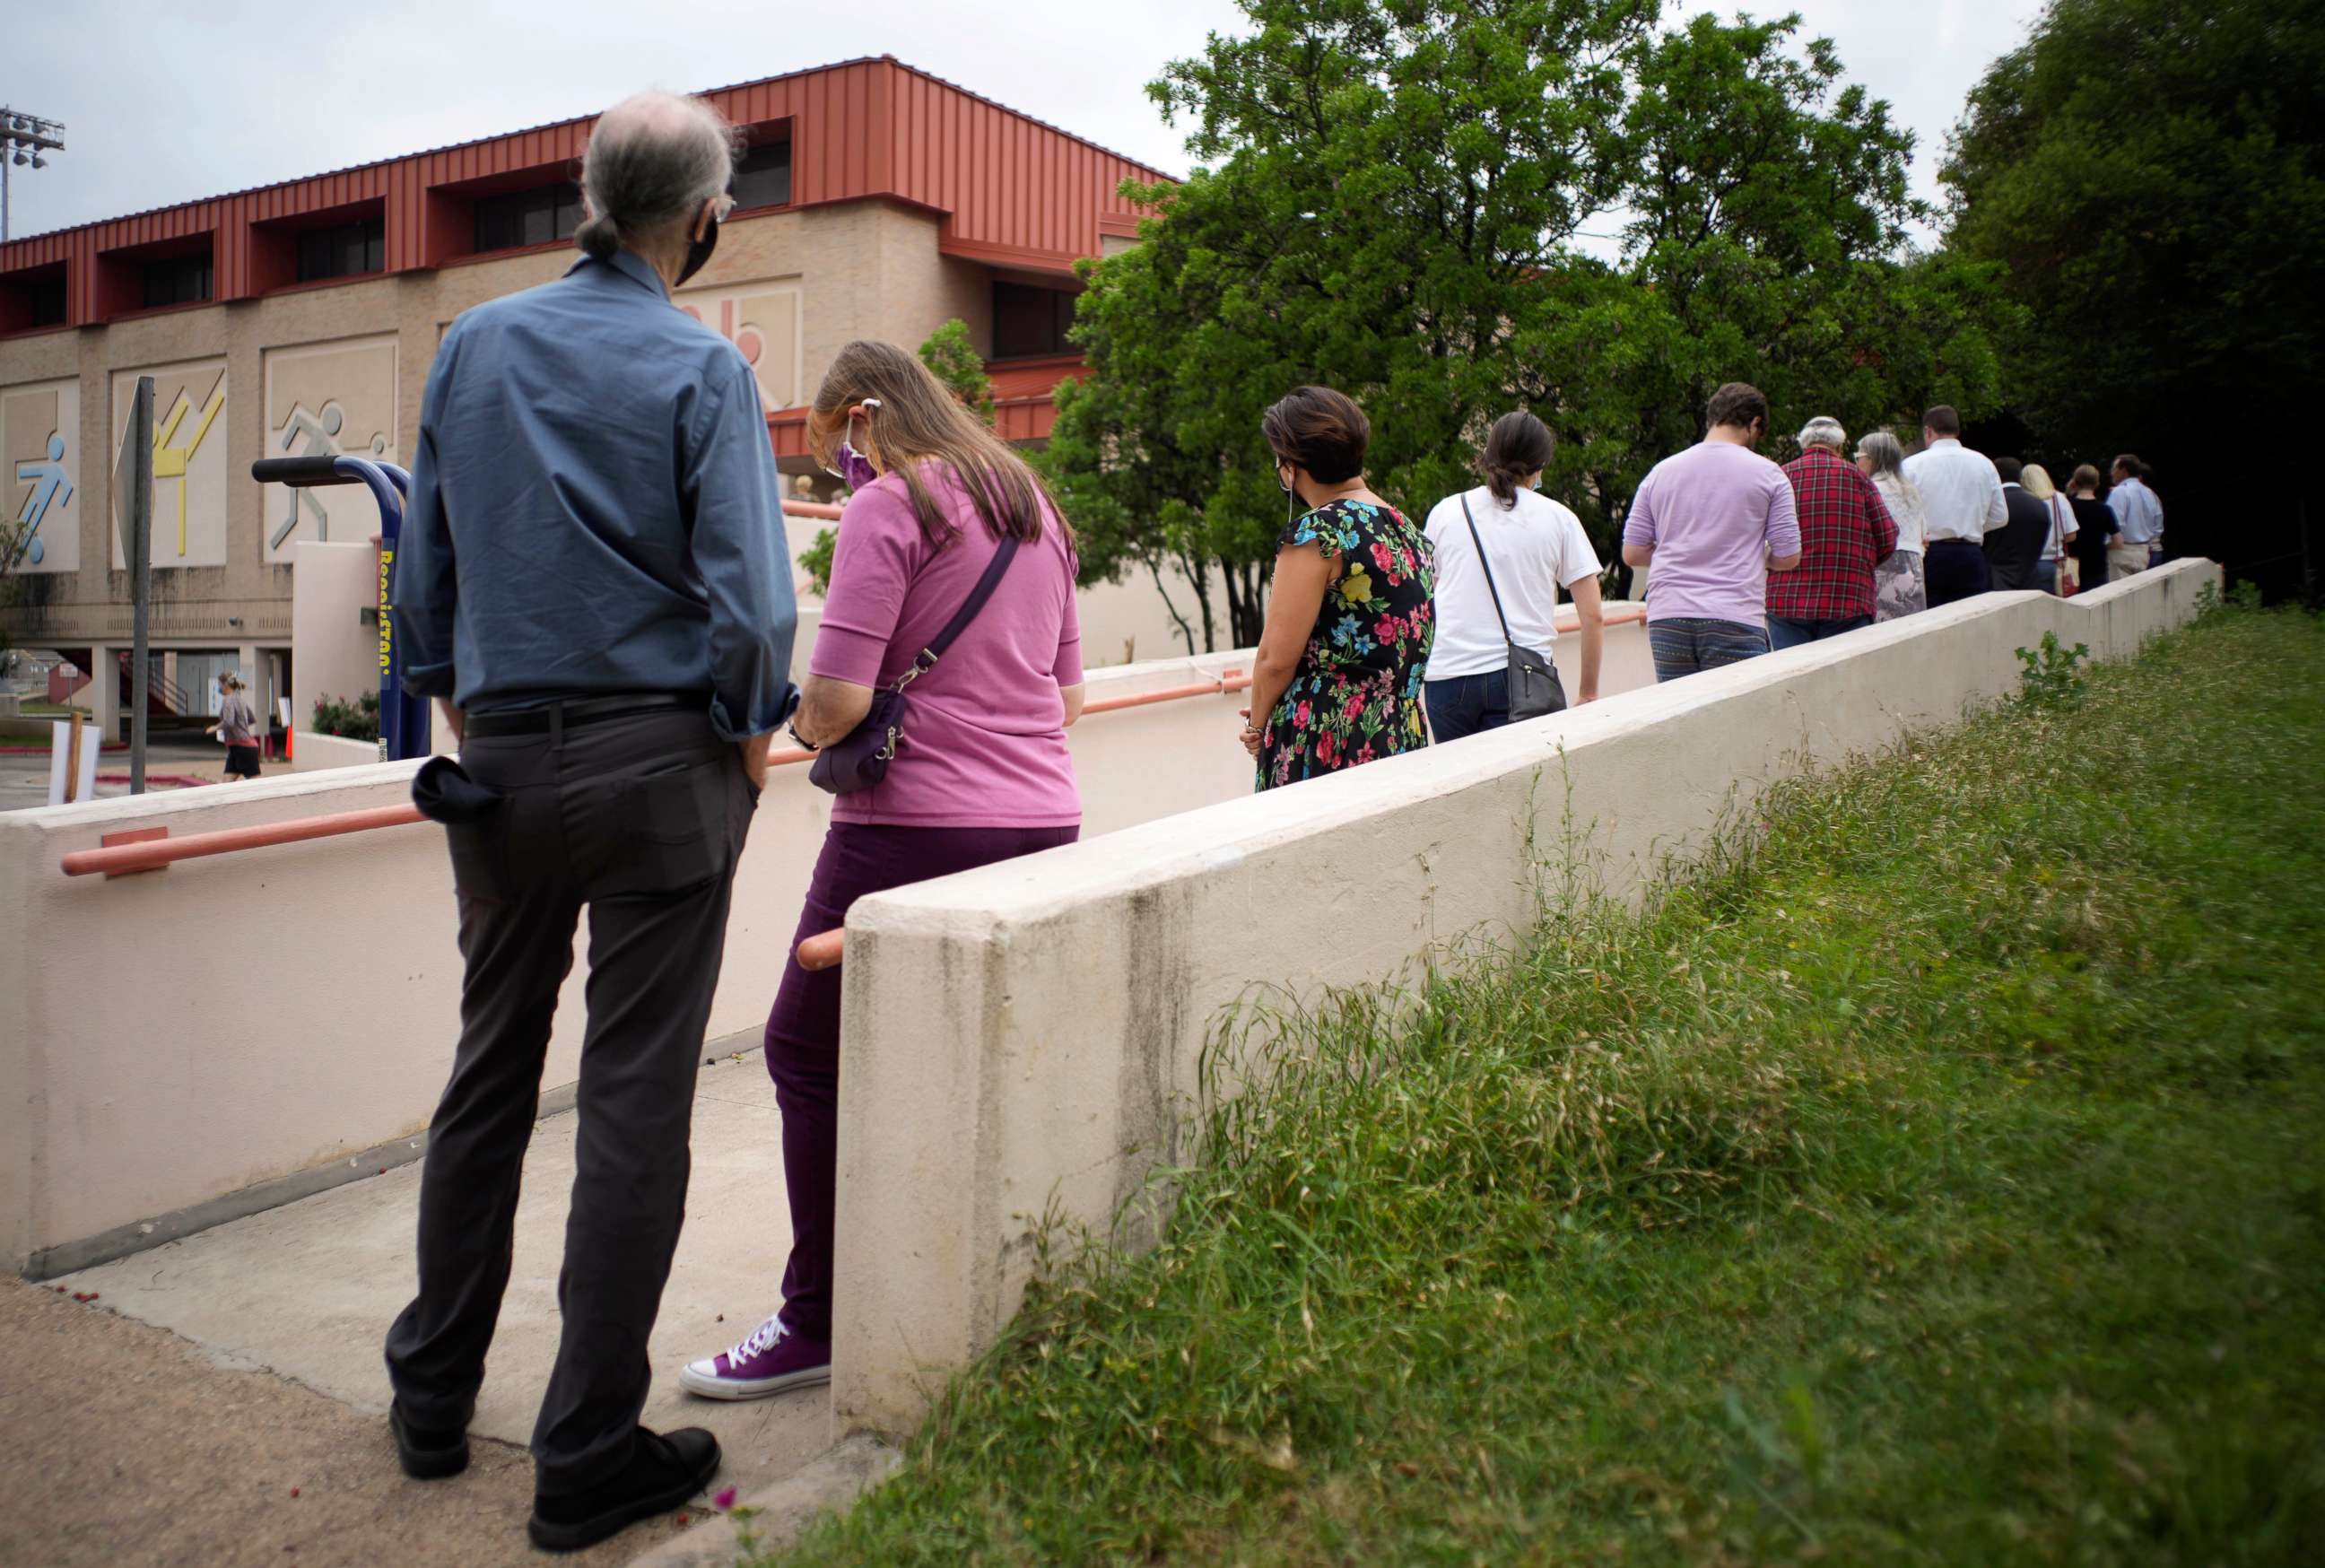 PHOTO: Austin, Texas residents line up in record numbers, April 27, 2021, for early voting on municipal issues.